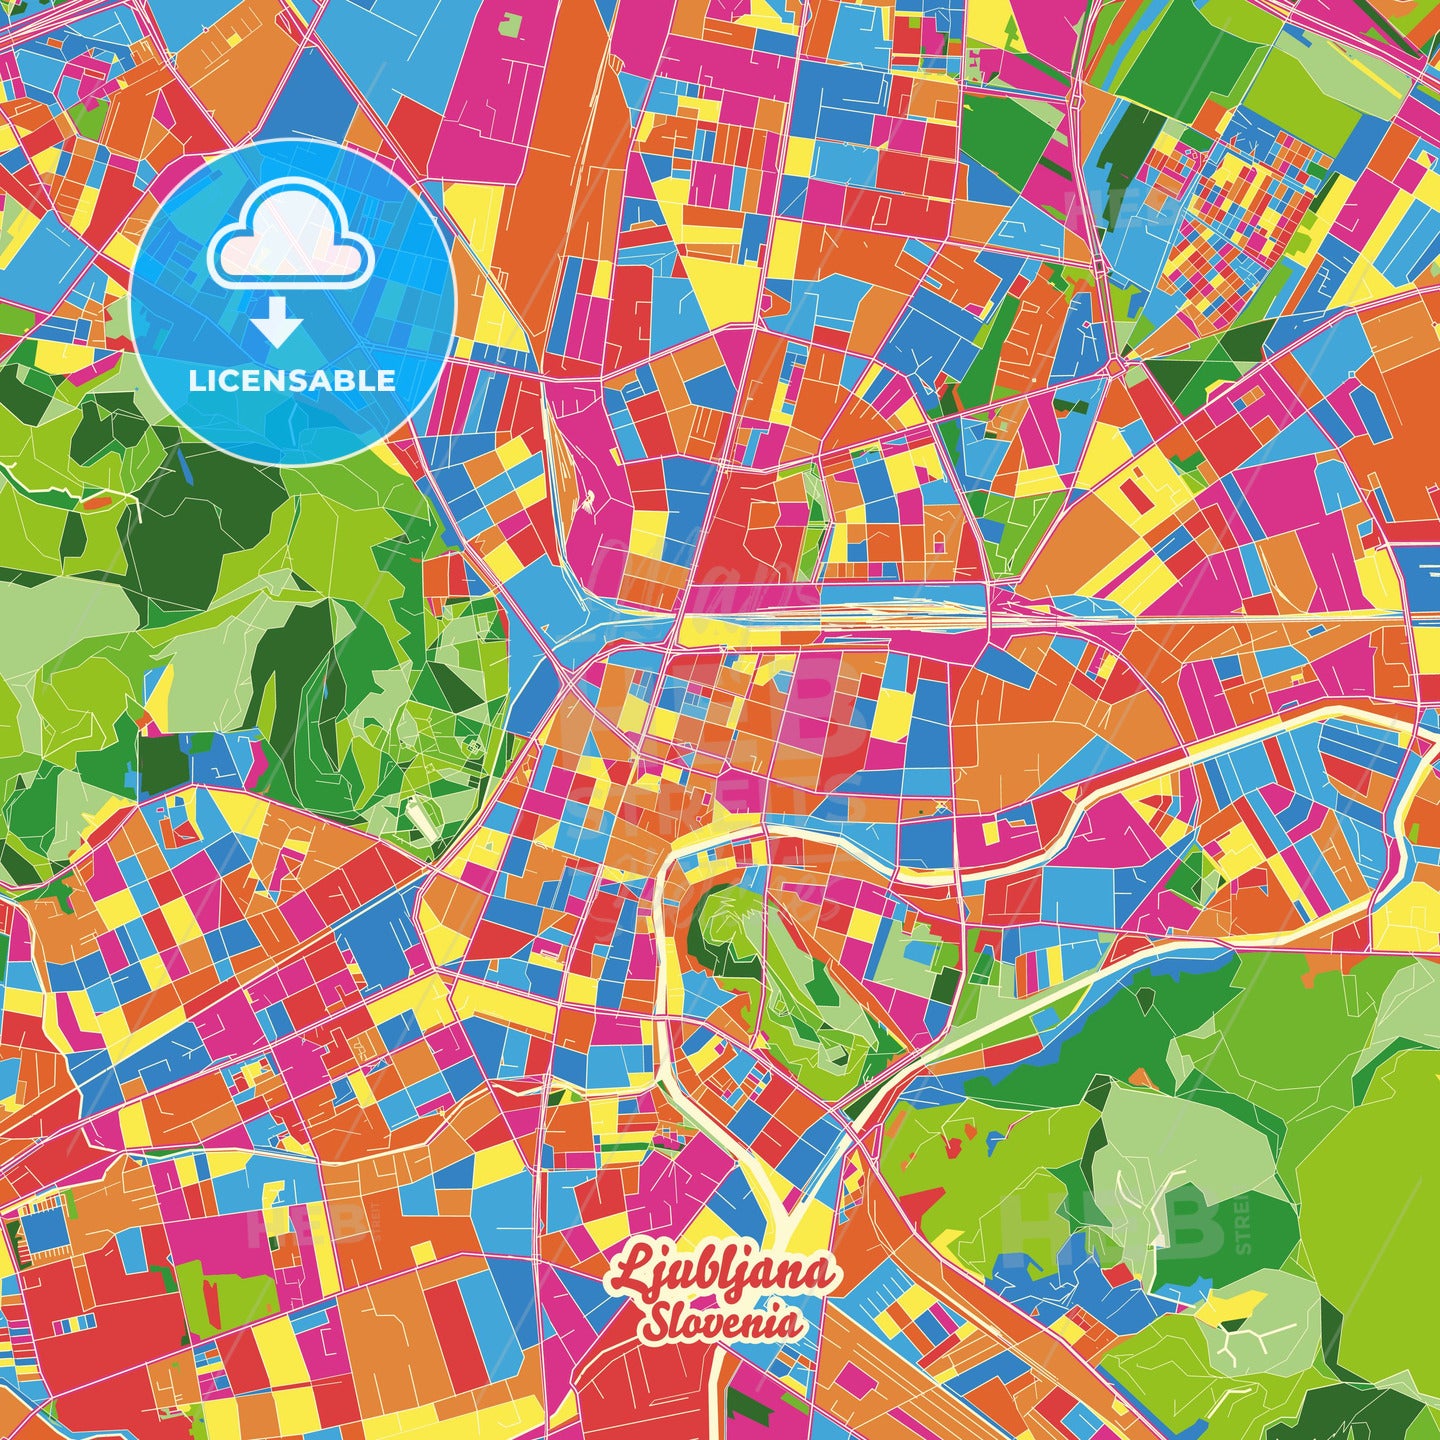 Ljubljana, Slovenia Crazy Colorful Street Map Poster Template - HEBSTREITS Sketches